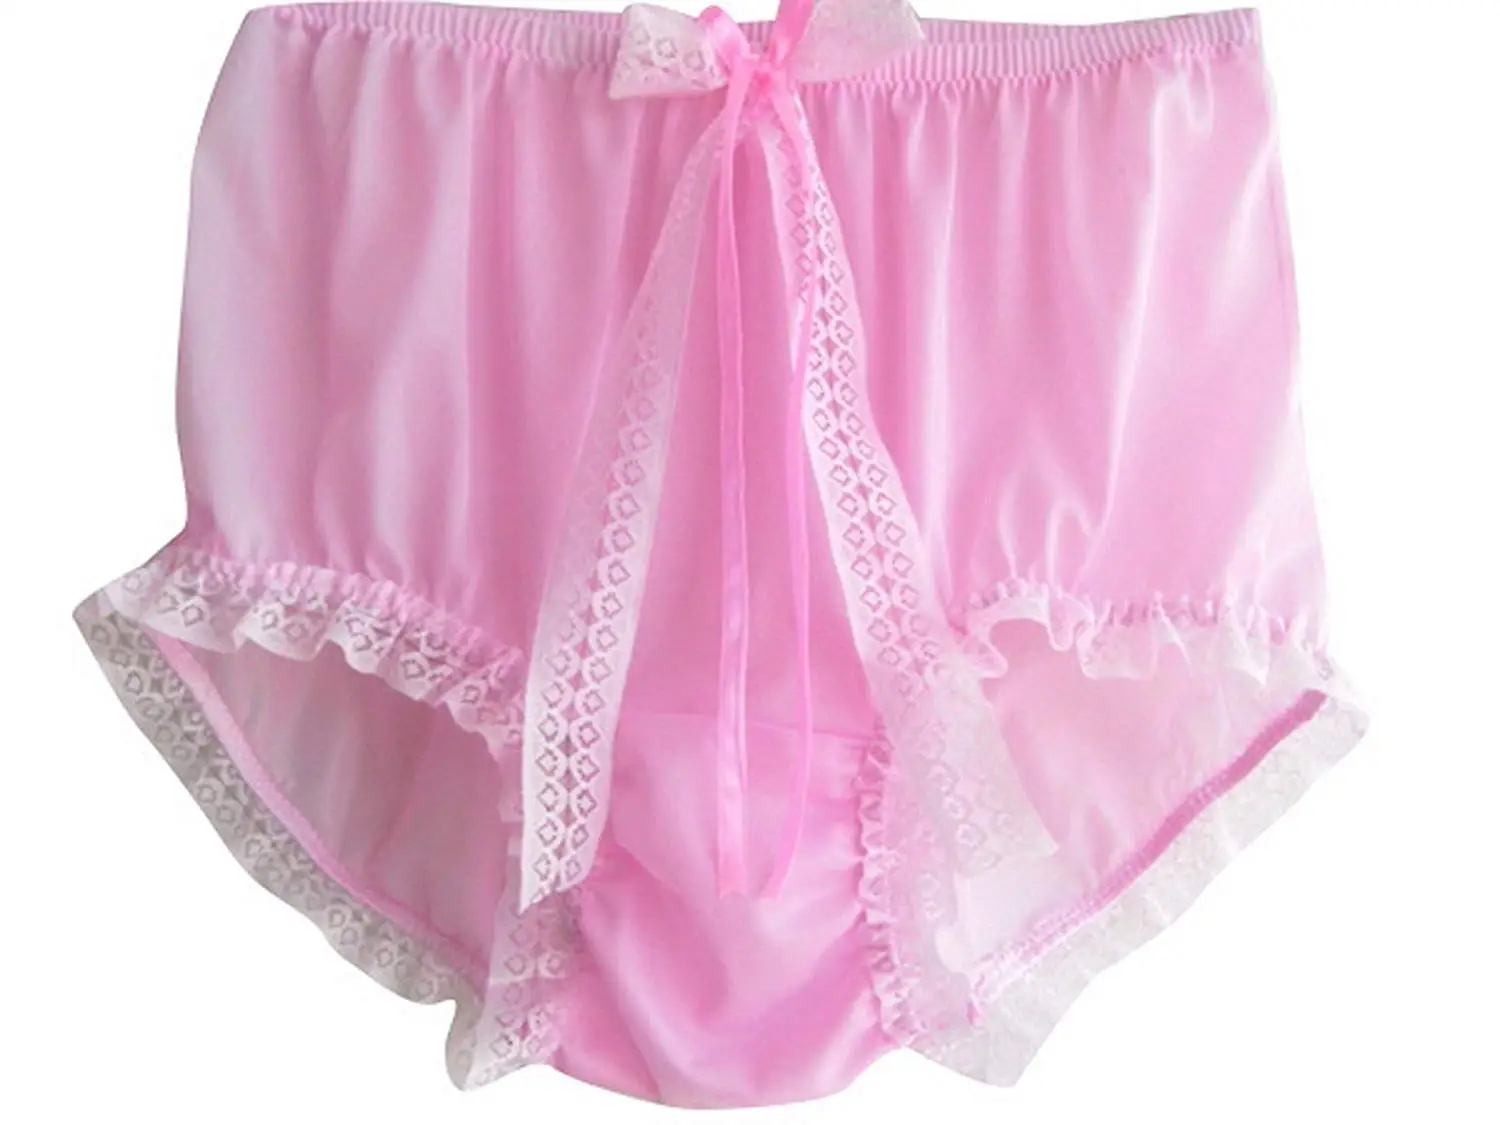 Cheap Pink Nylon Knickers, find Pink Nylon Knickers deals on line at ...